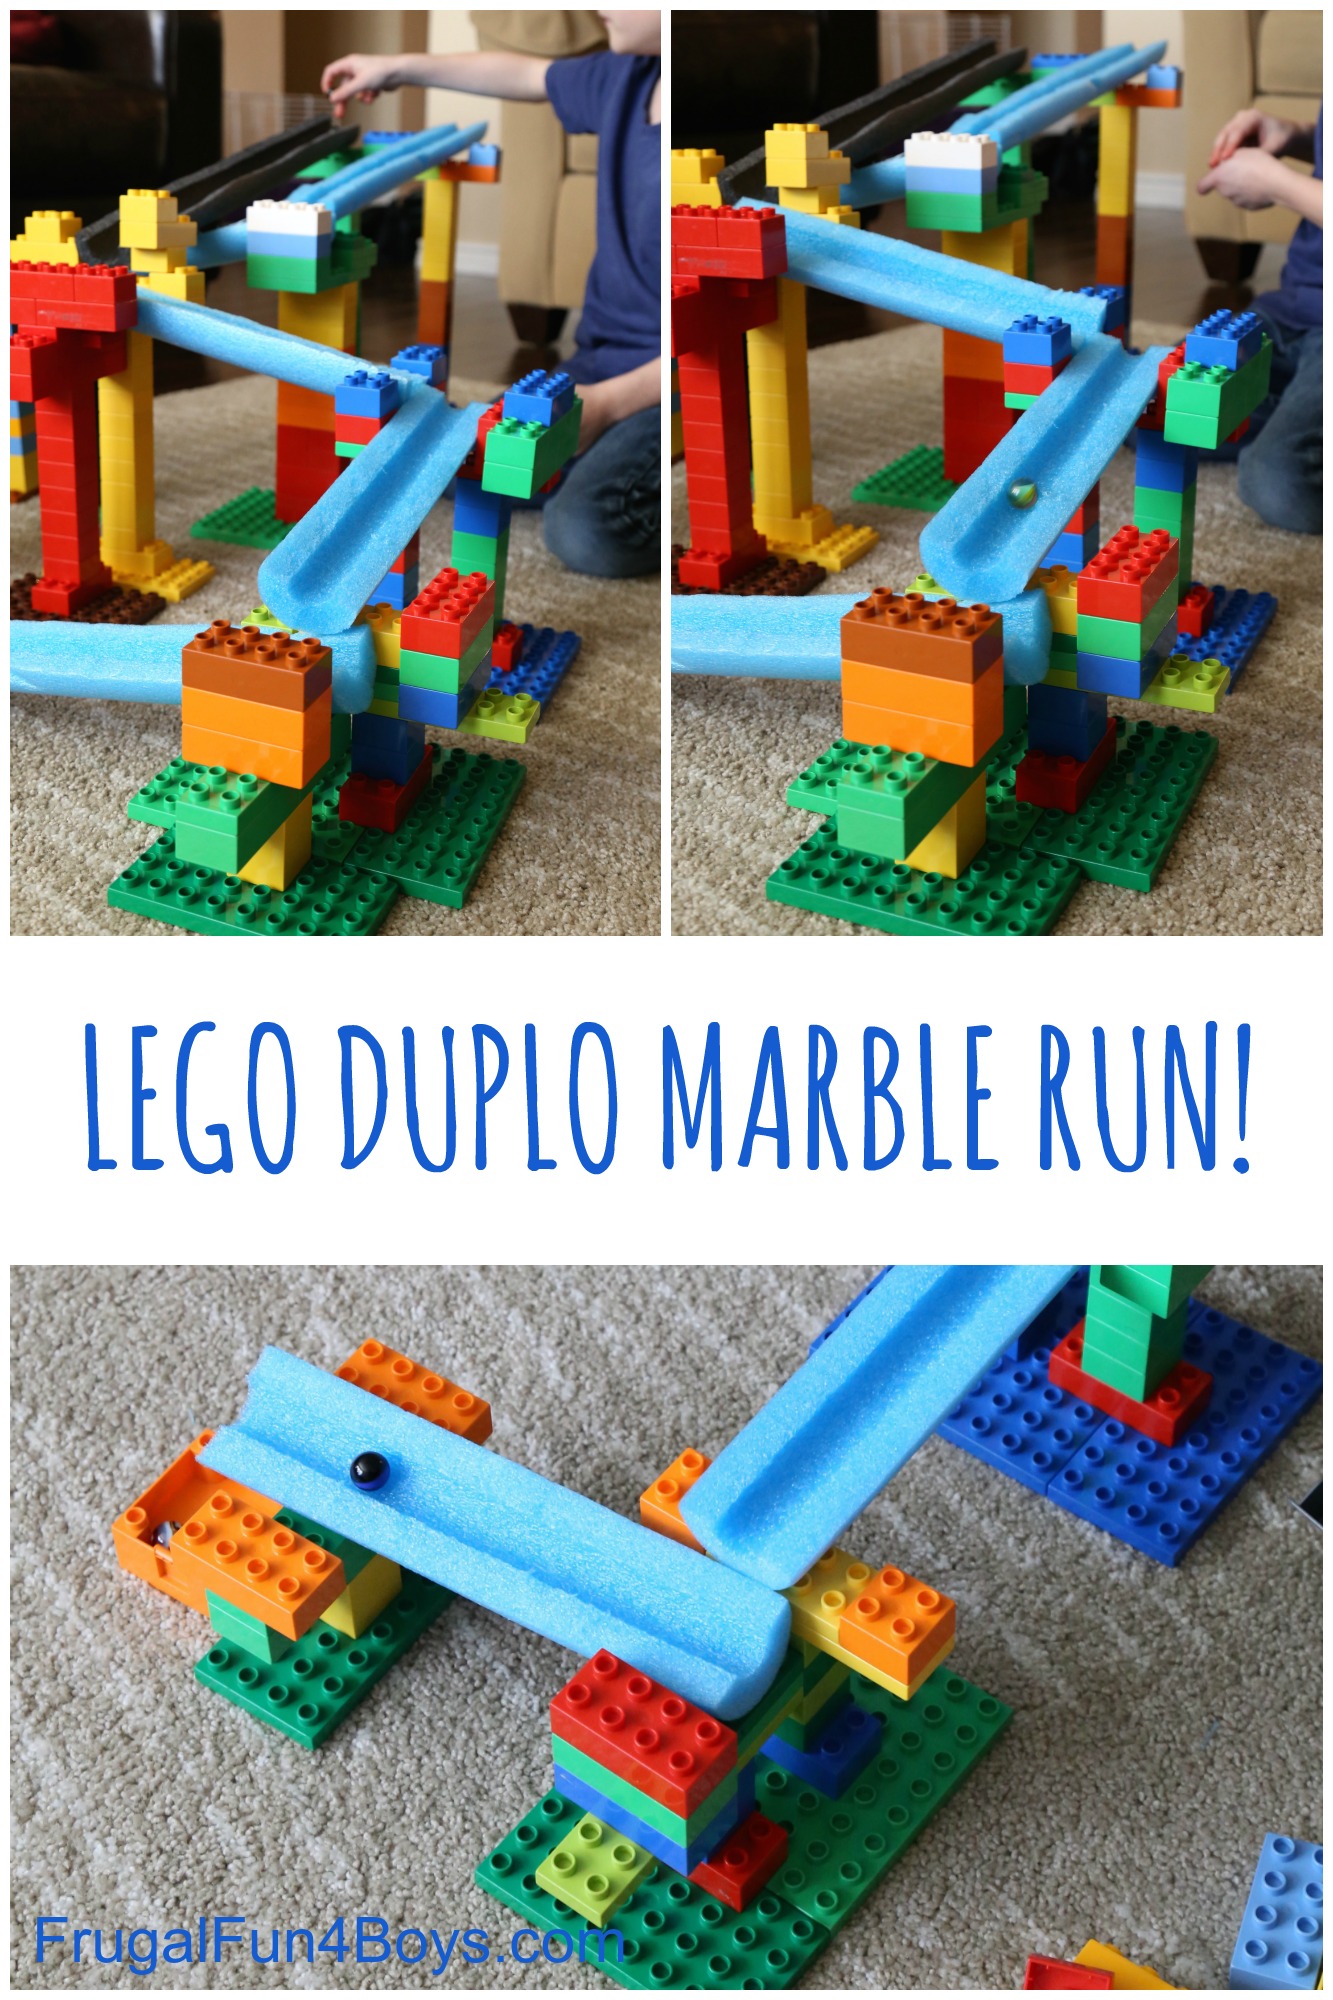 STEM Building Challenge for Kids: Engineer a LEGO and Pool Noodle Marble Run!